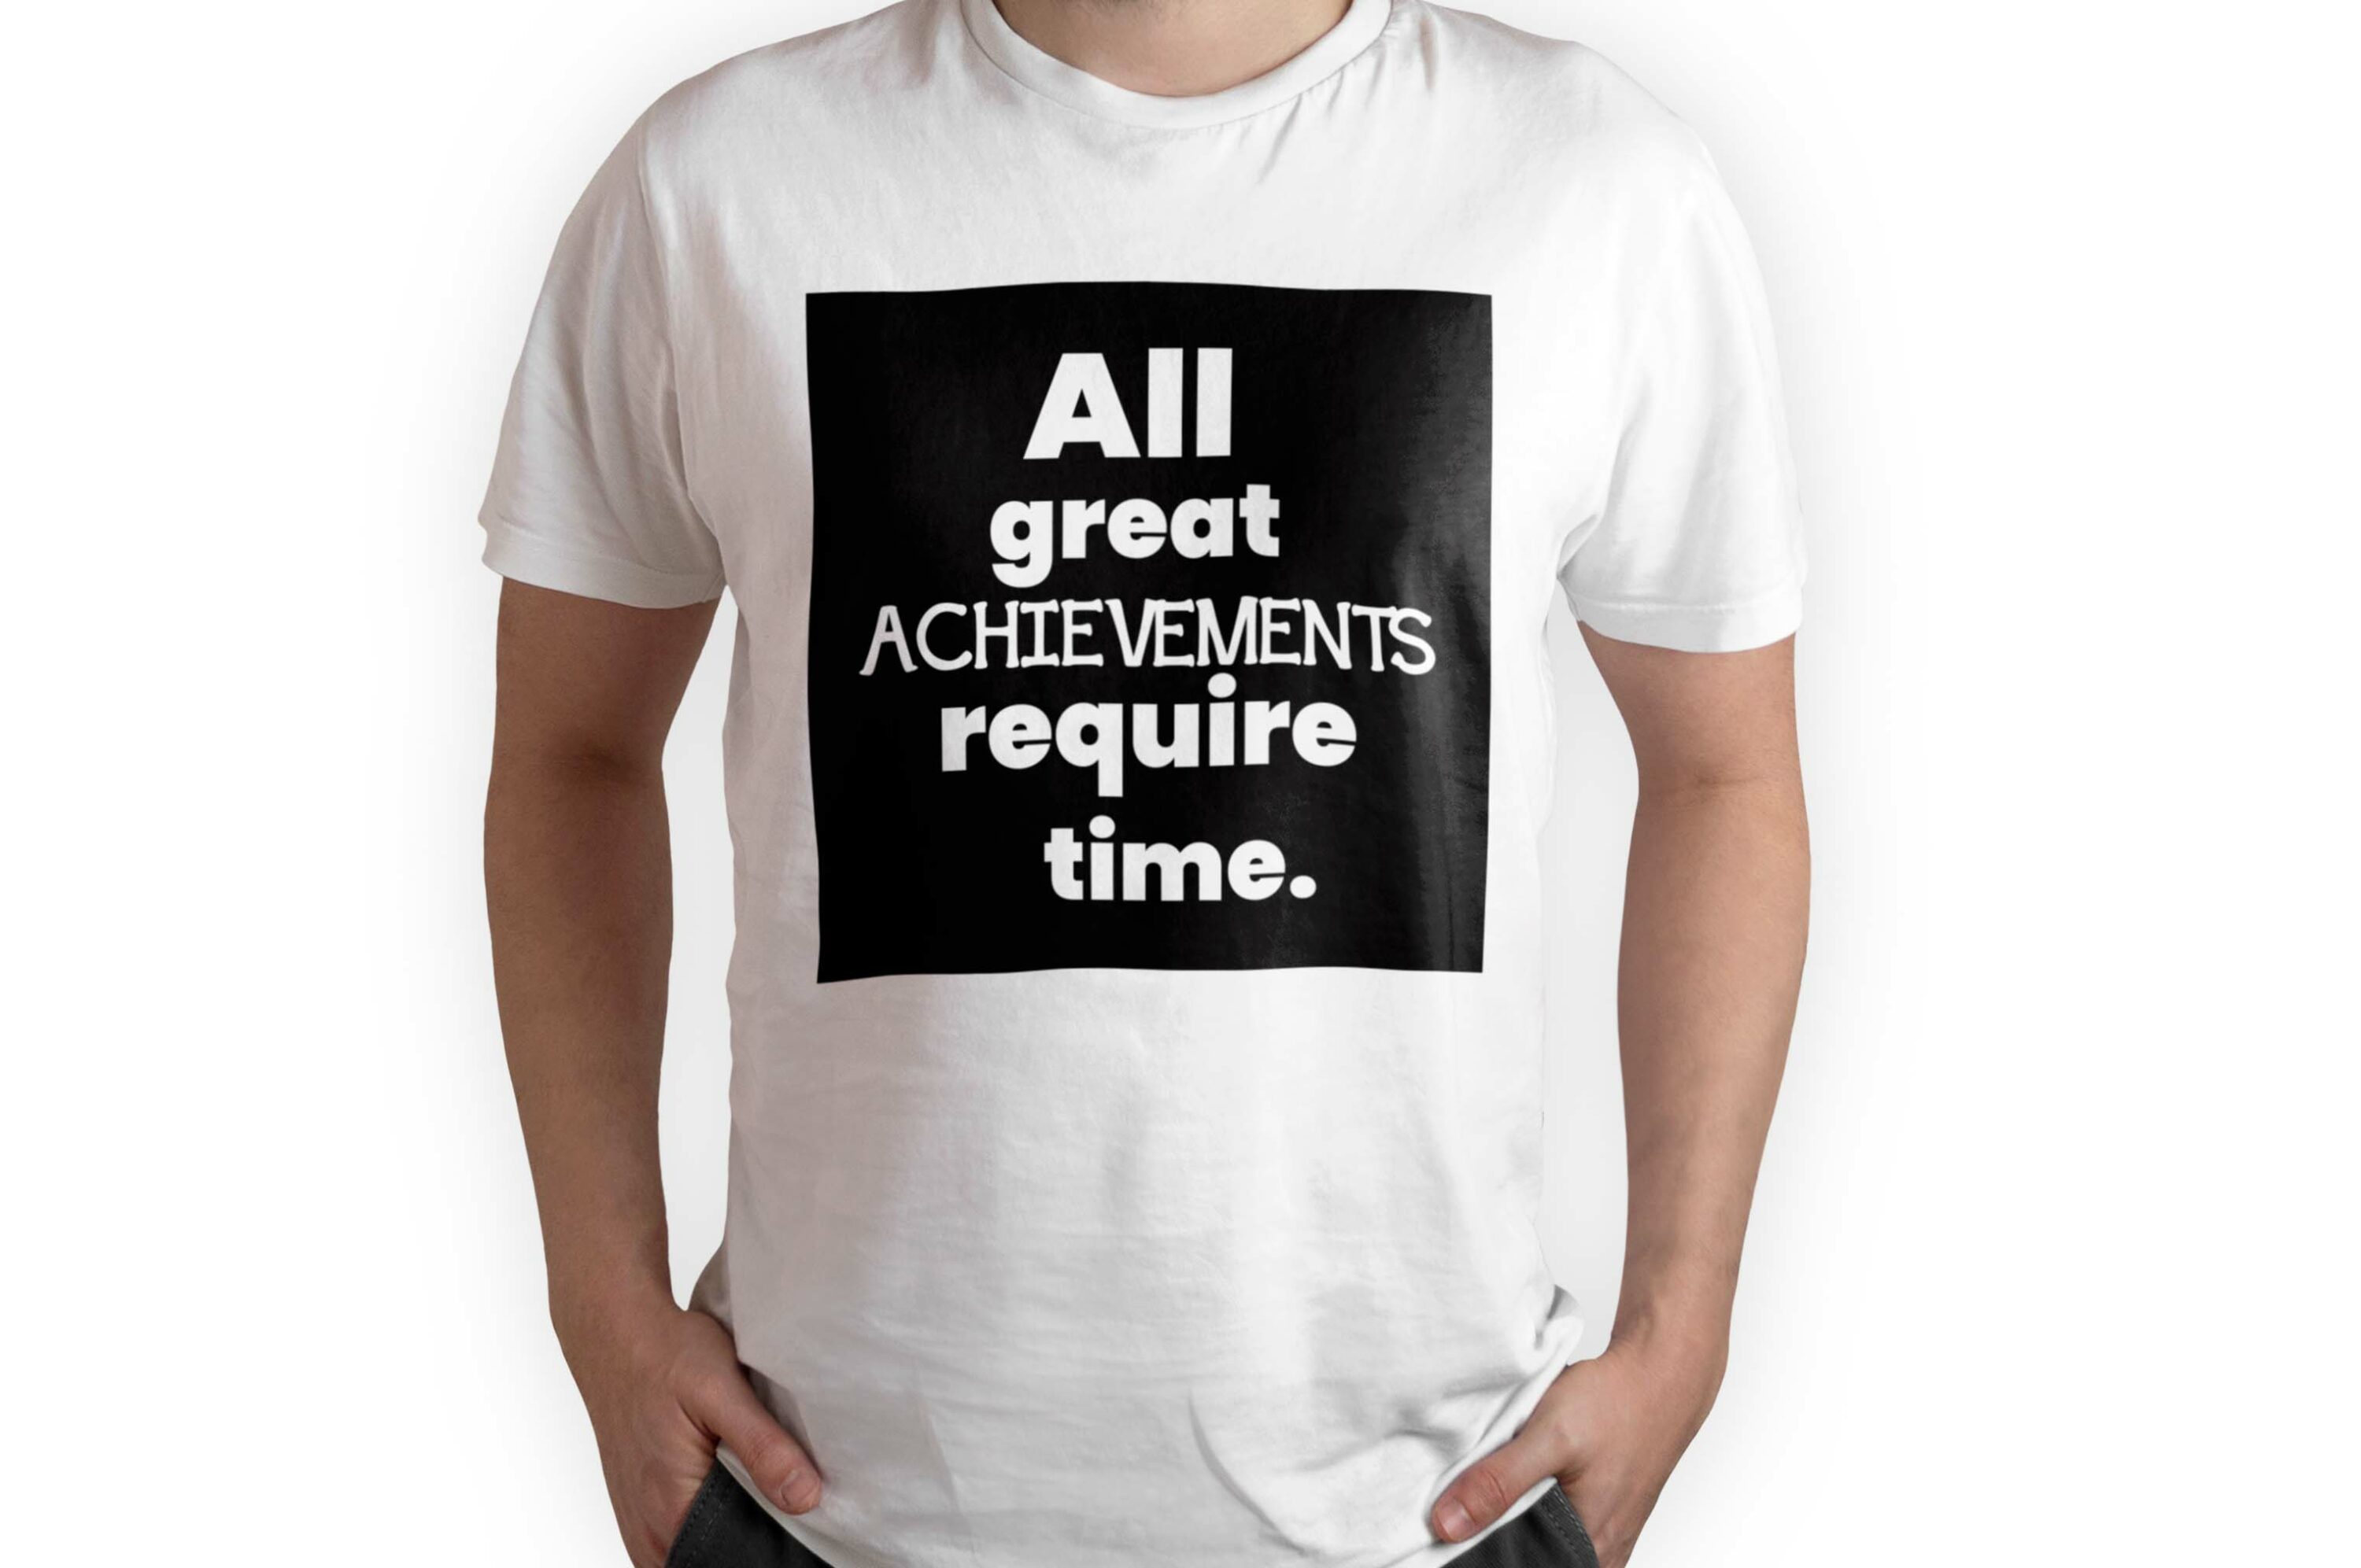 Bundle of 156 T-shirt Designs with Fitness Quotes, all great achievements require time.